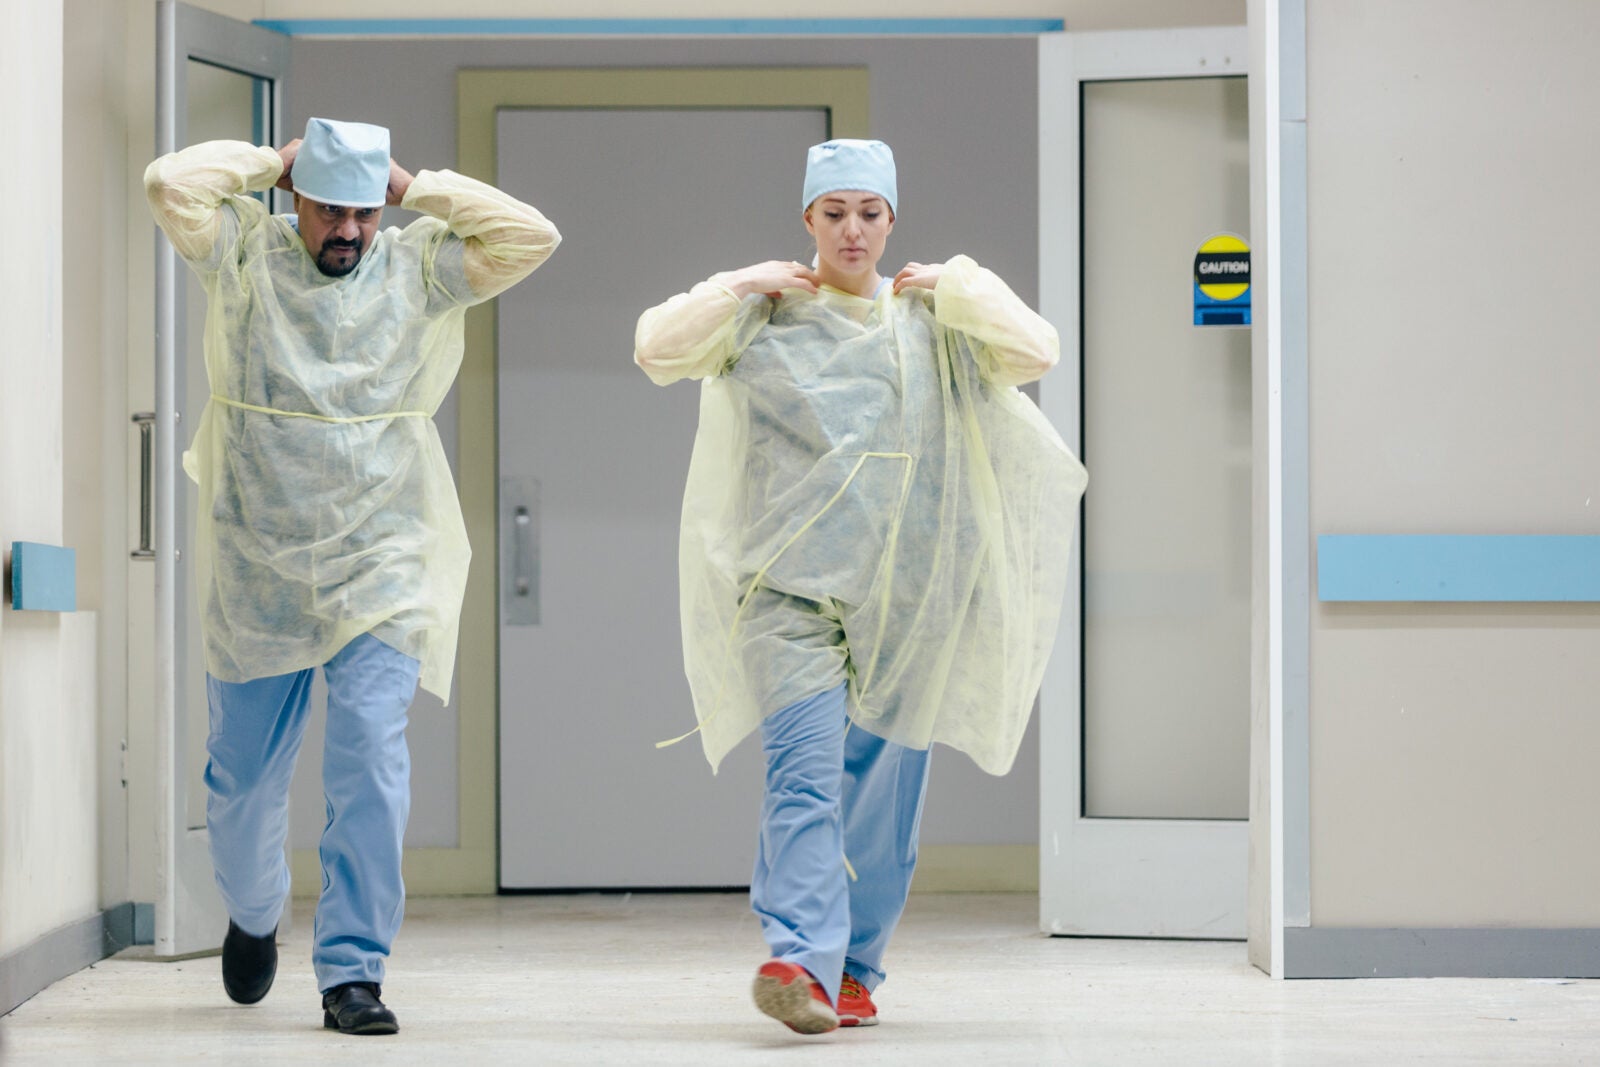 Two medical doctors walking in a hospital hallway in their surgical scrubs.